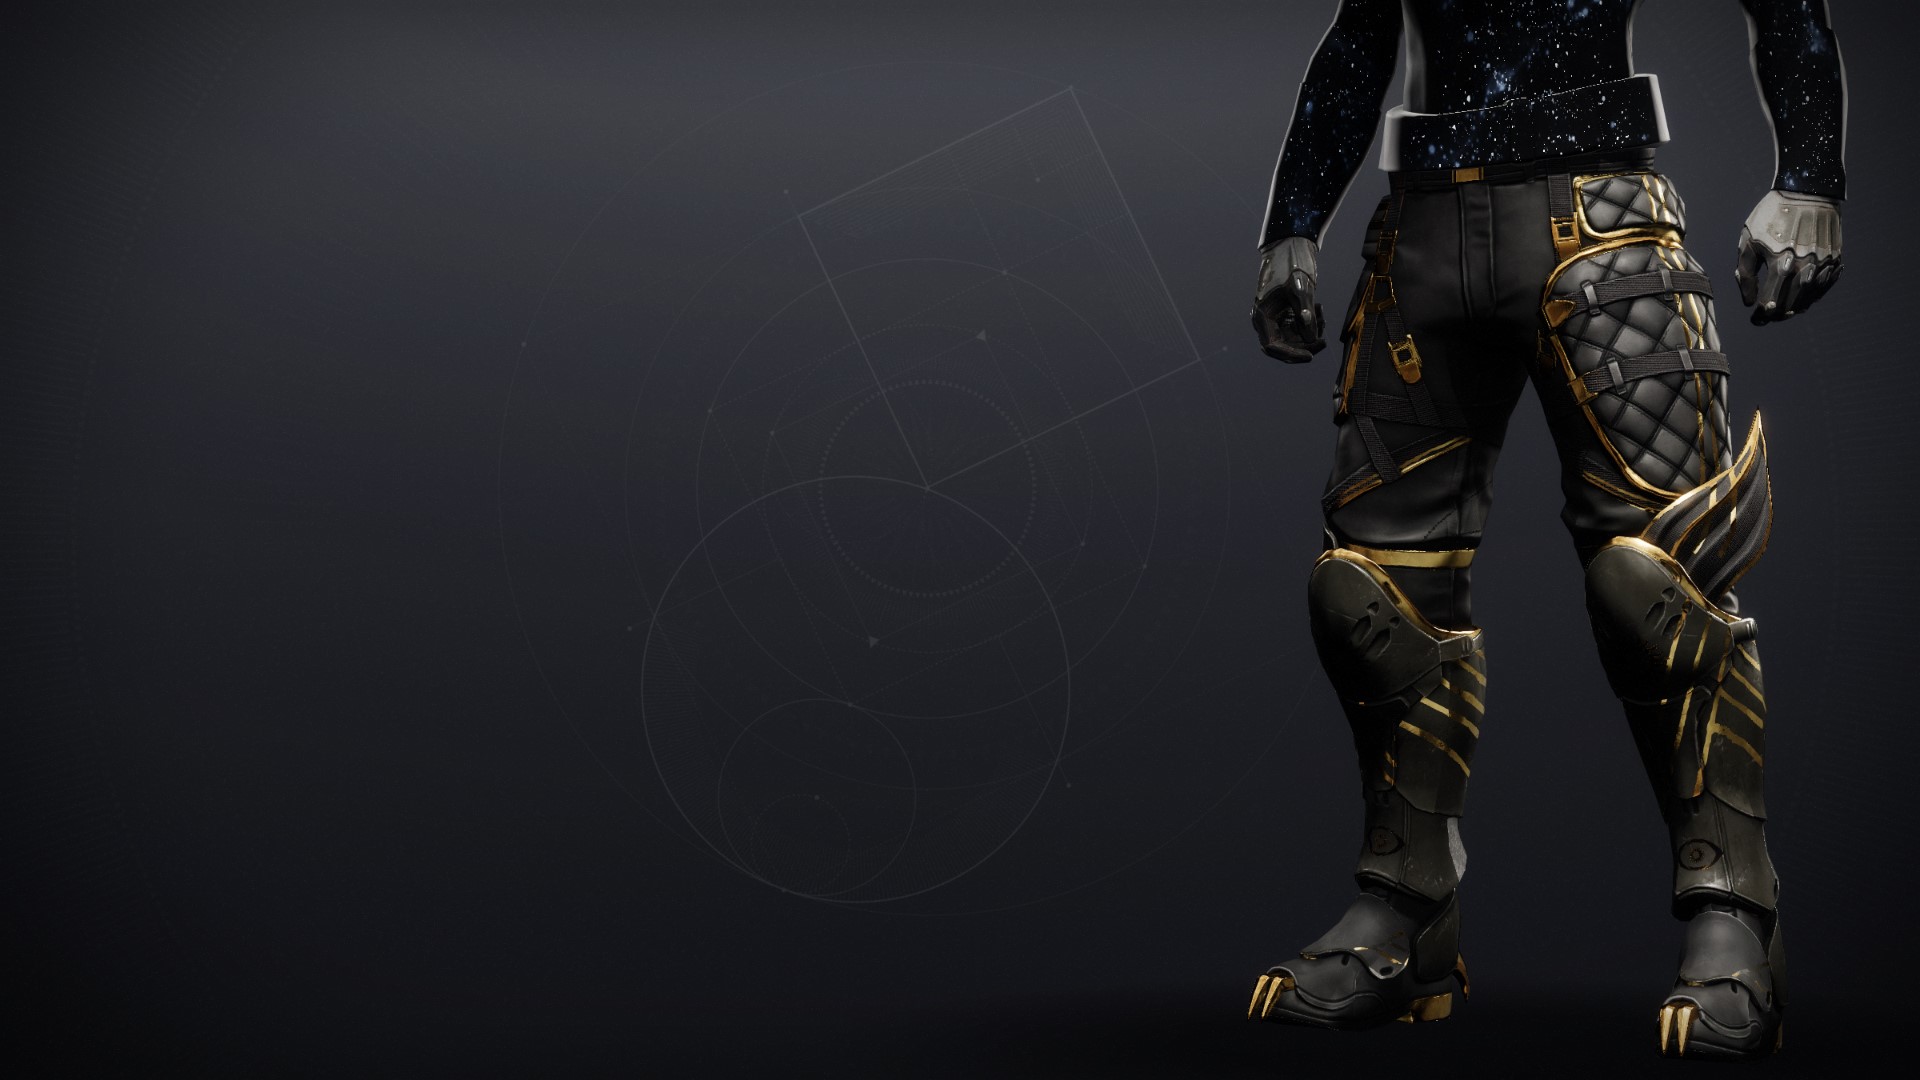 An in-game render of the Photonic Boots.